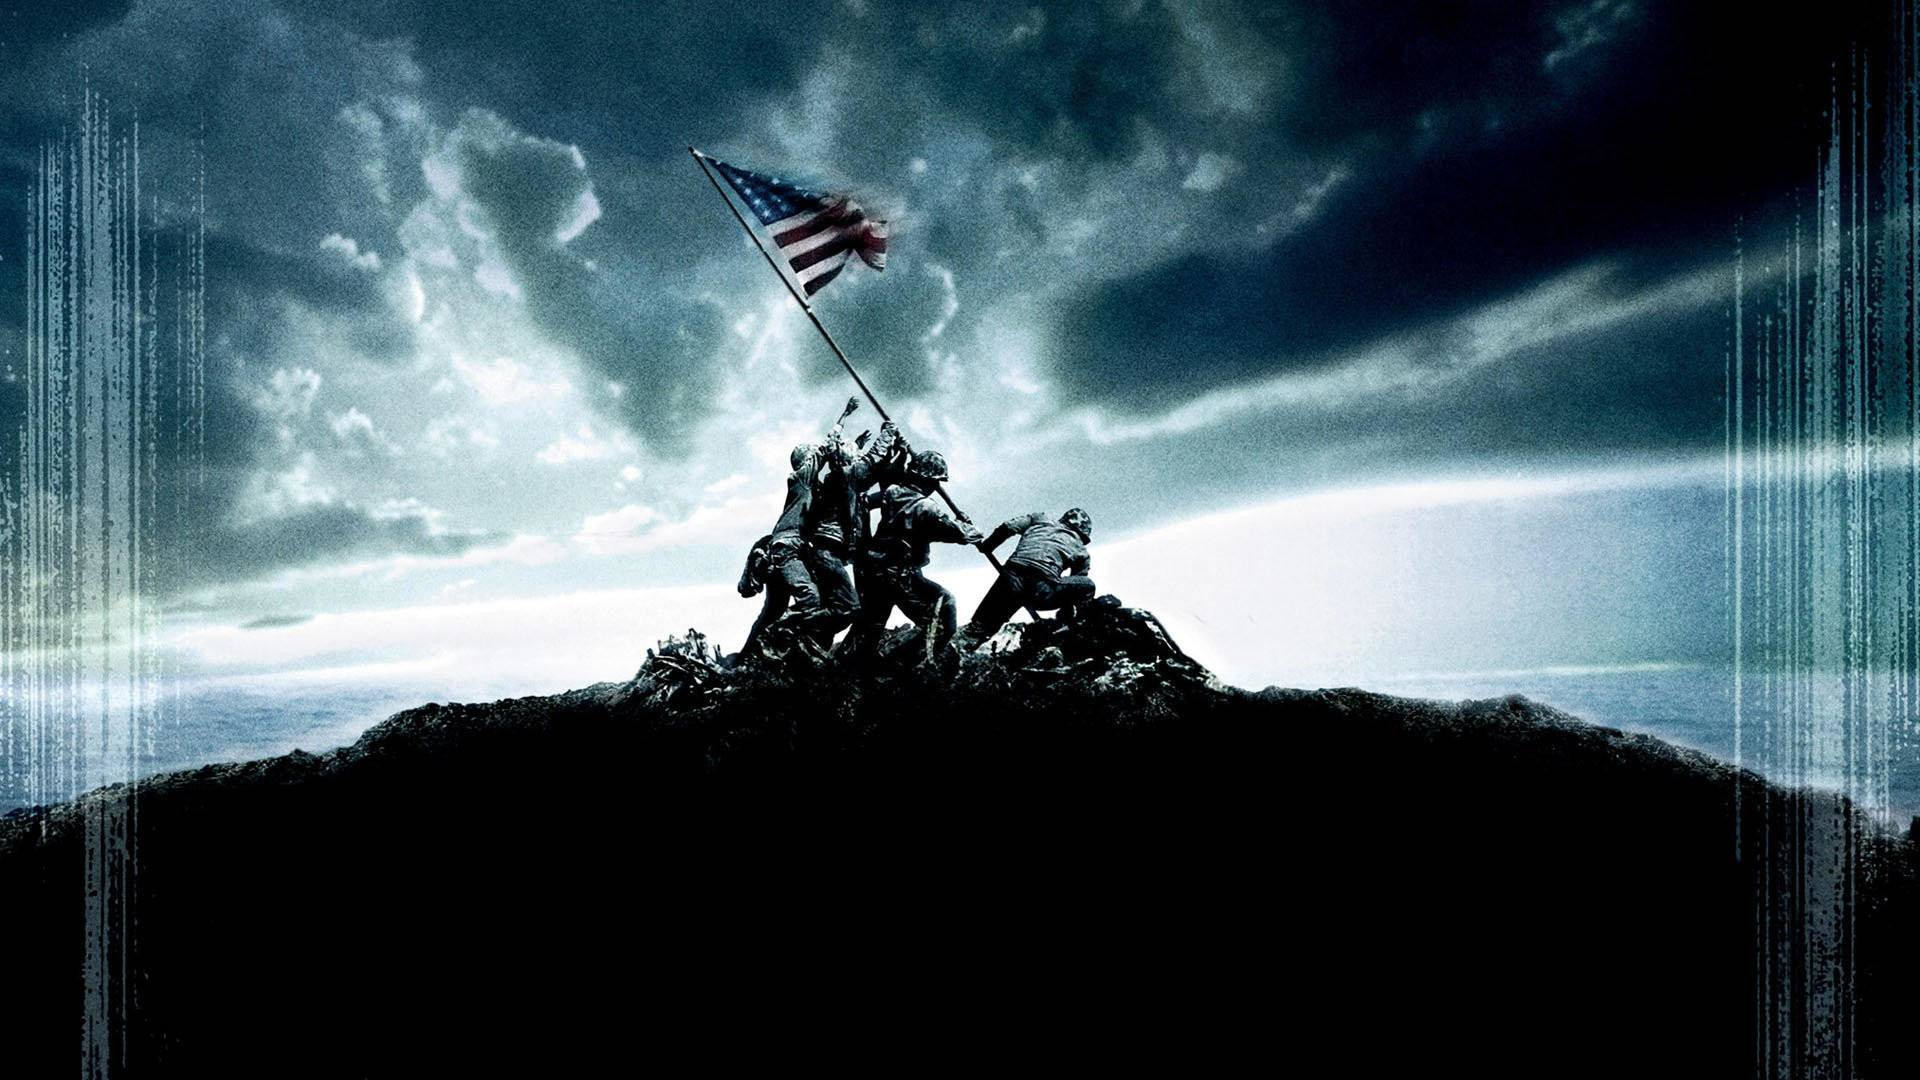 1920x1080 0 1280x720 US Marine Wallpapers  US Marines HD Wallpapers | THIS  Wallpaper